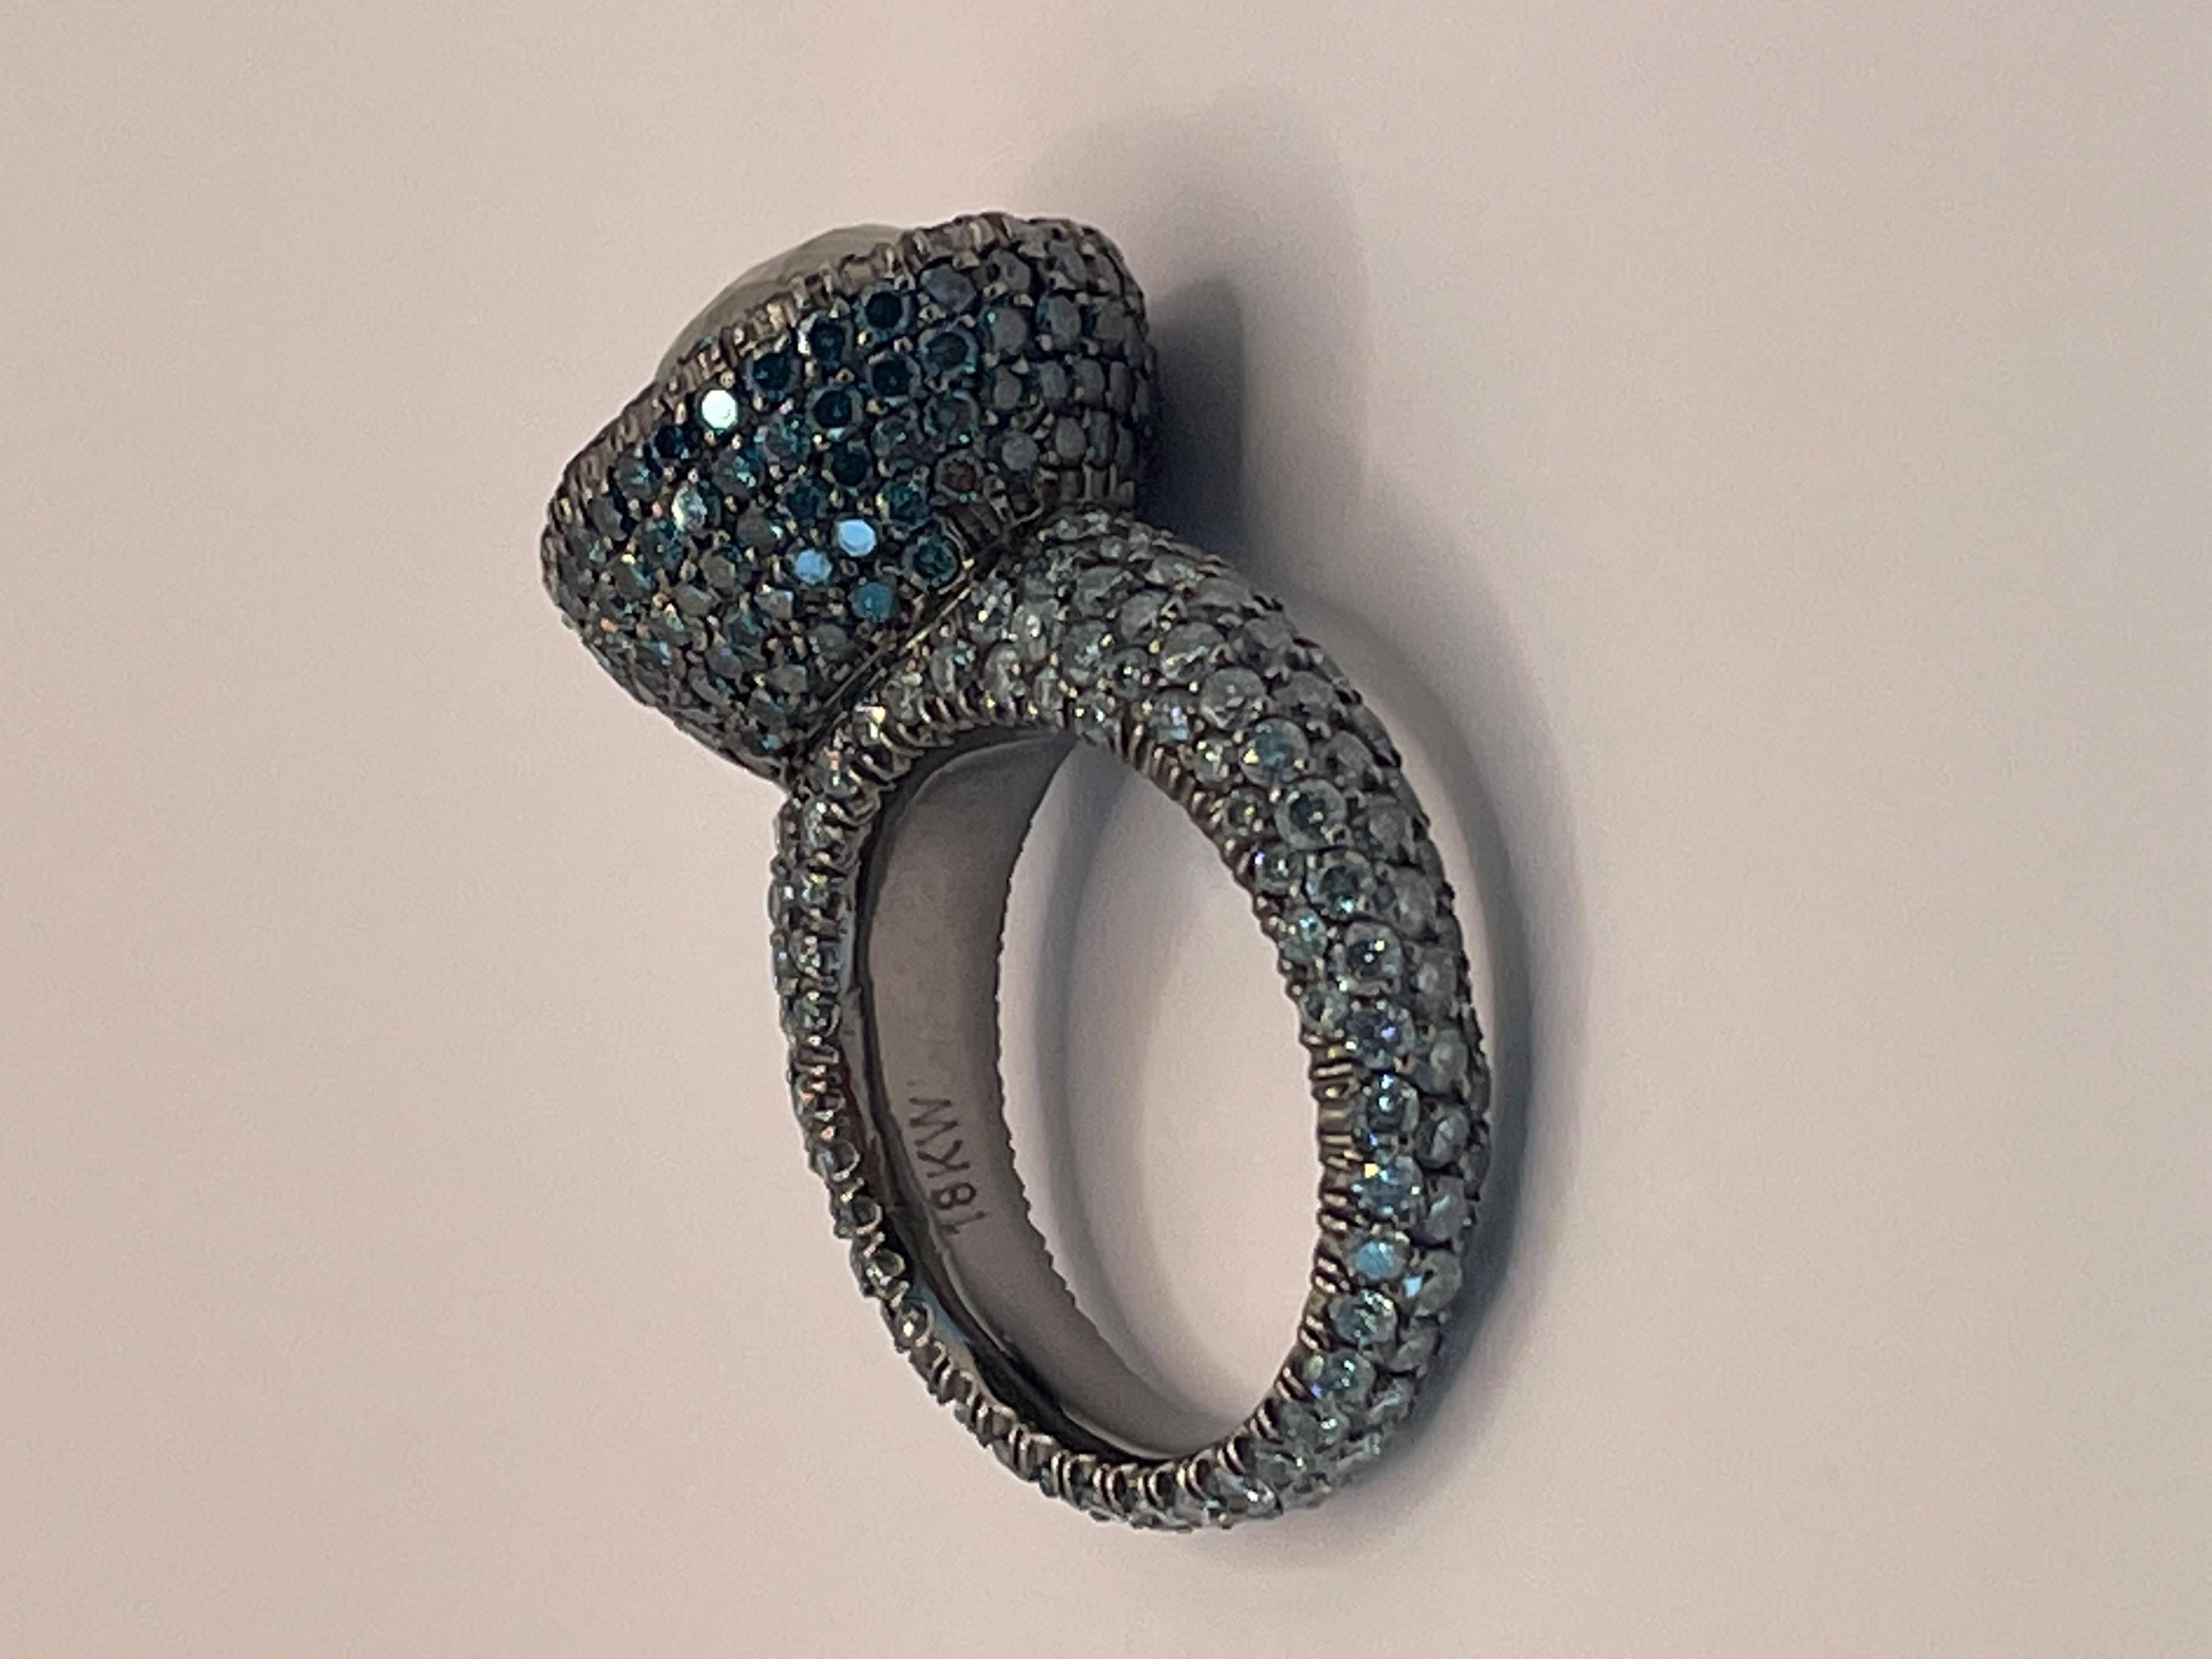 Raw Salt and Pepper grey  diamond ( 4.5ct )and blue diamonds pave (  5.7ct) cocktail ring set in 18k white gold ,covered in black rhodium.One of a kind ,size 6.75 can not be sized .Unique ,standing out piece of jewelry !